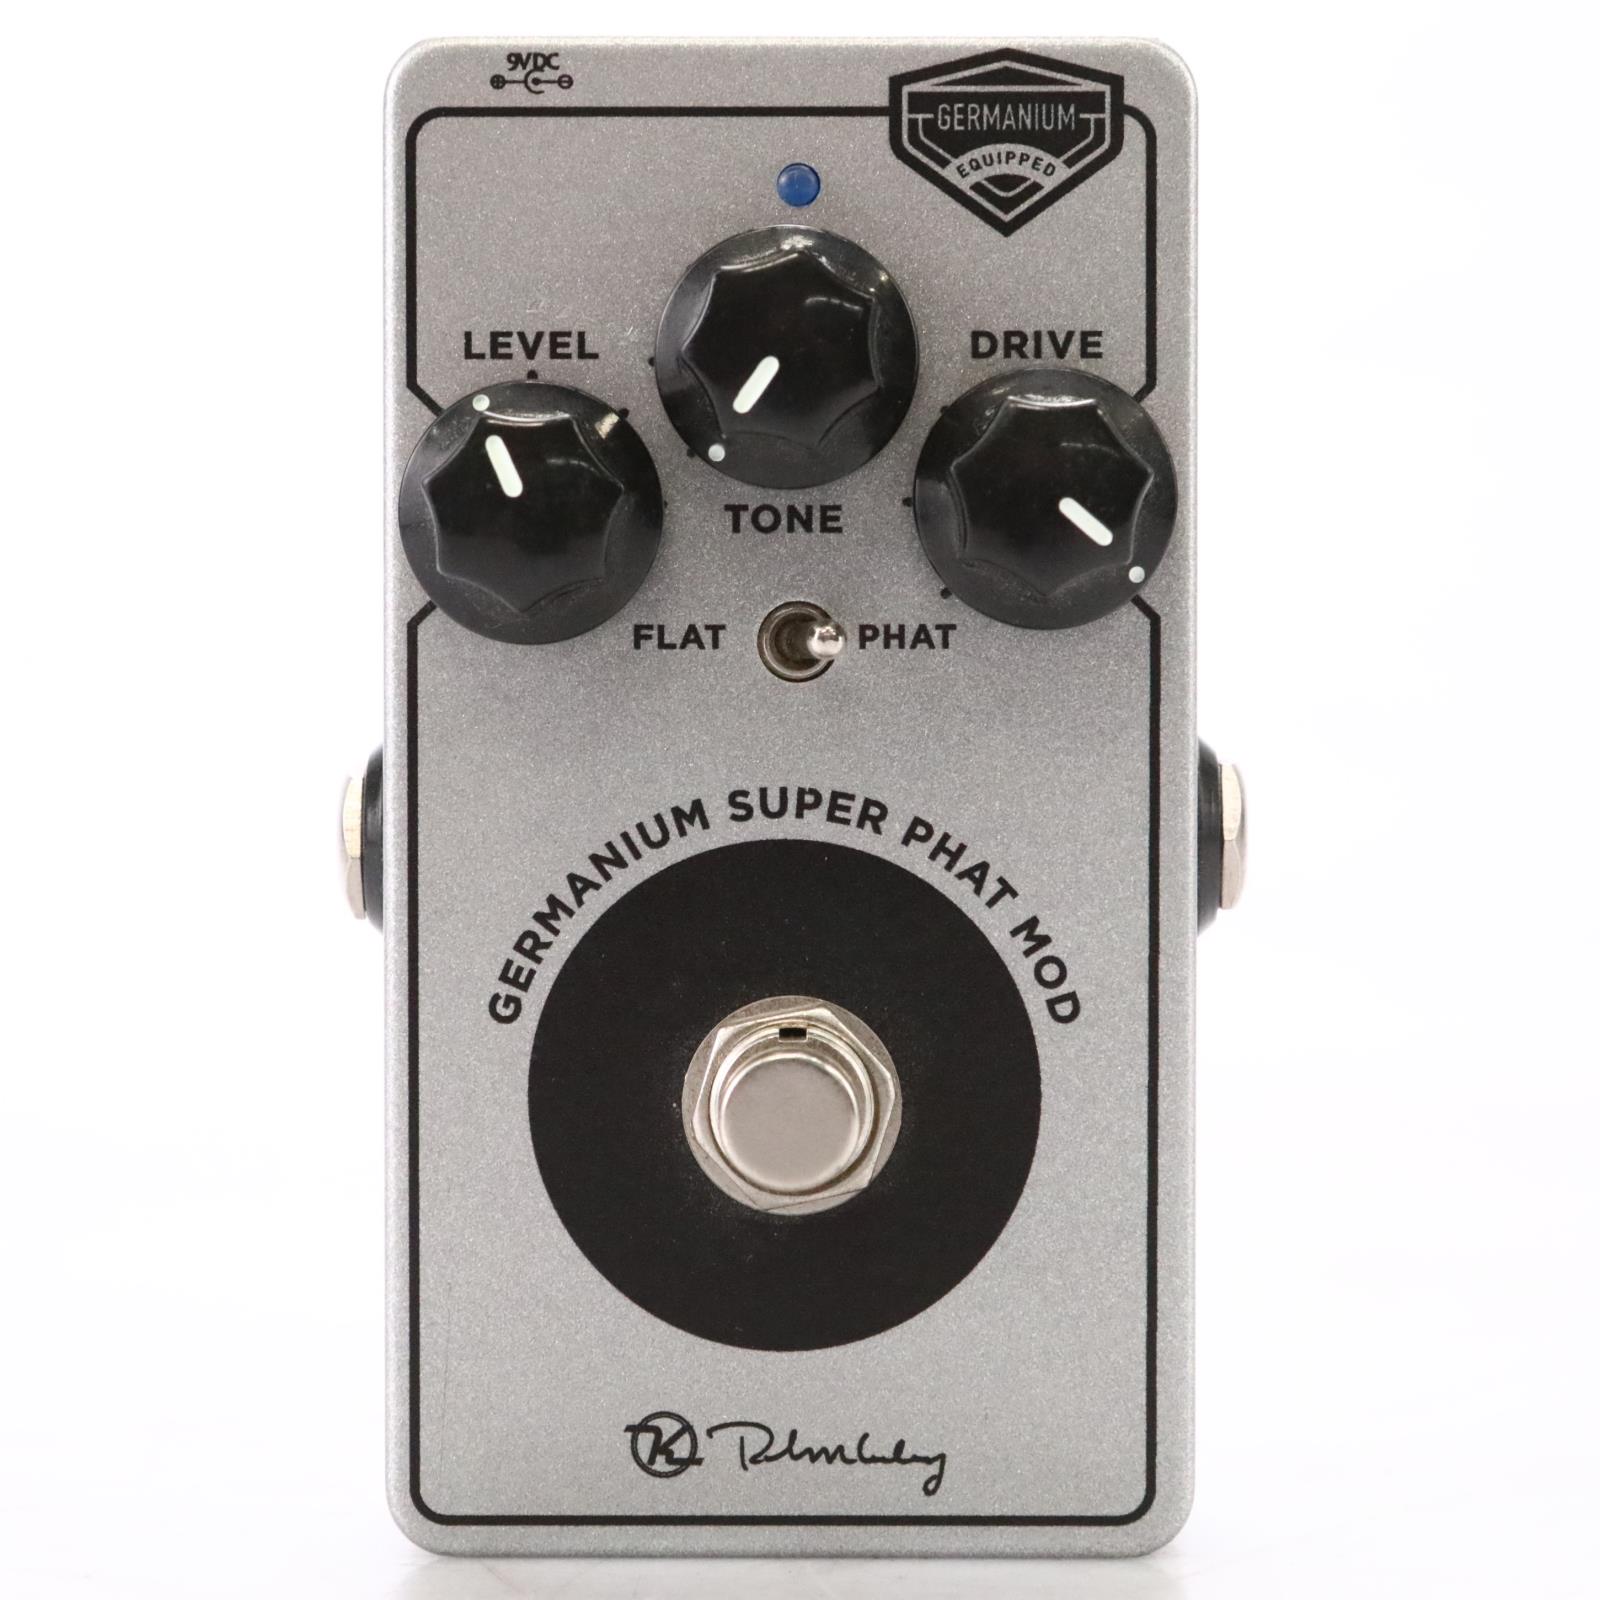 Keeley Germanium Super Phat Mod Overdrive Guitar Effects Pedal #50339